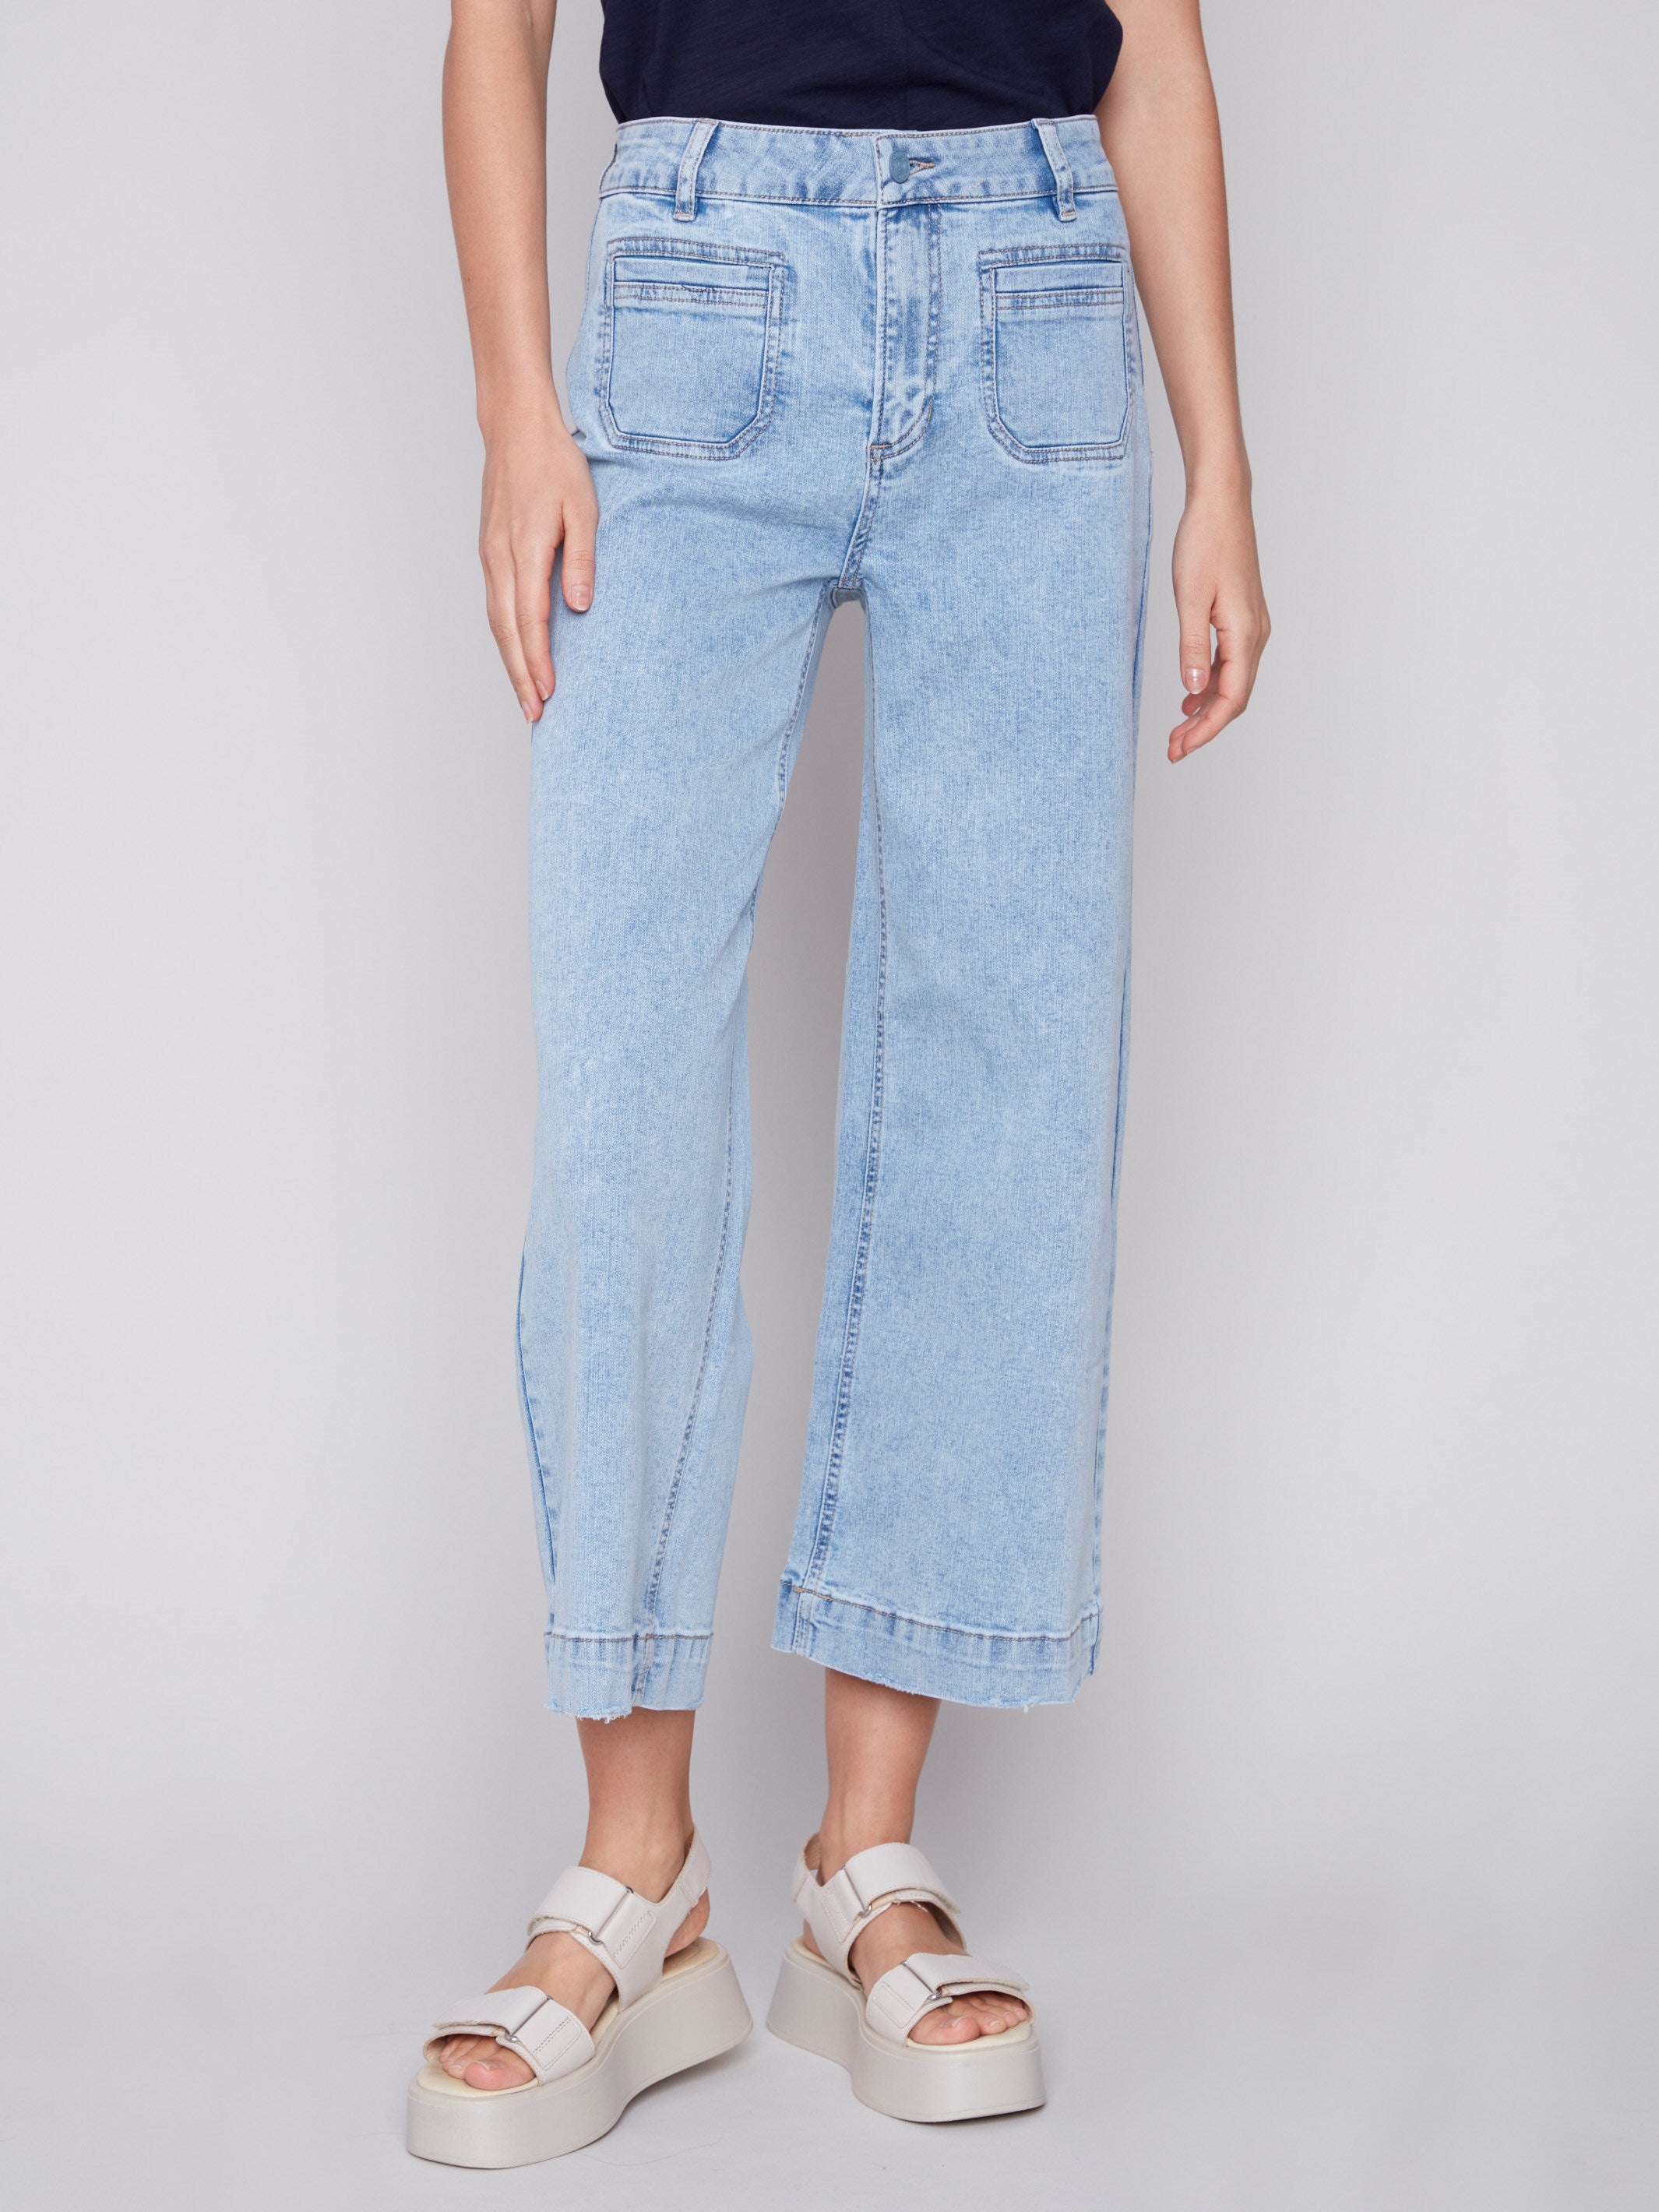 Cropped Wide Leg Jeans - Blue Jean - Charlie B Collection Canada - Image 2